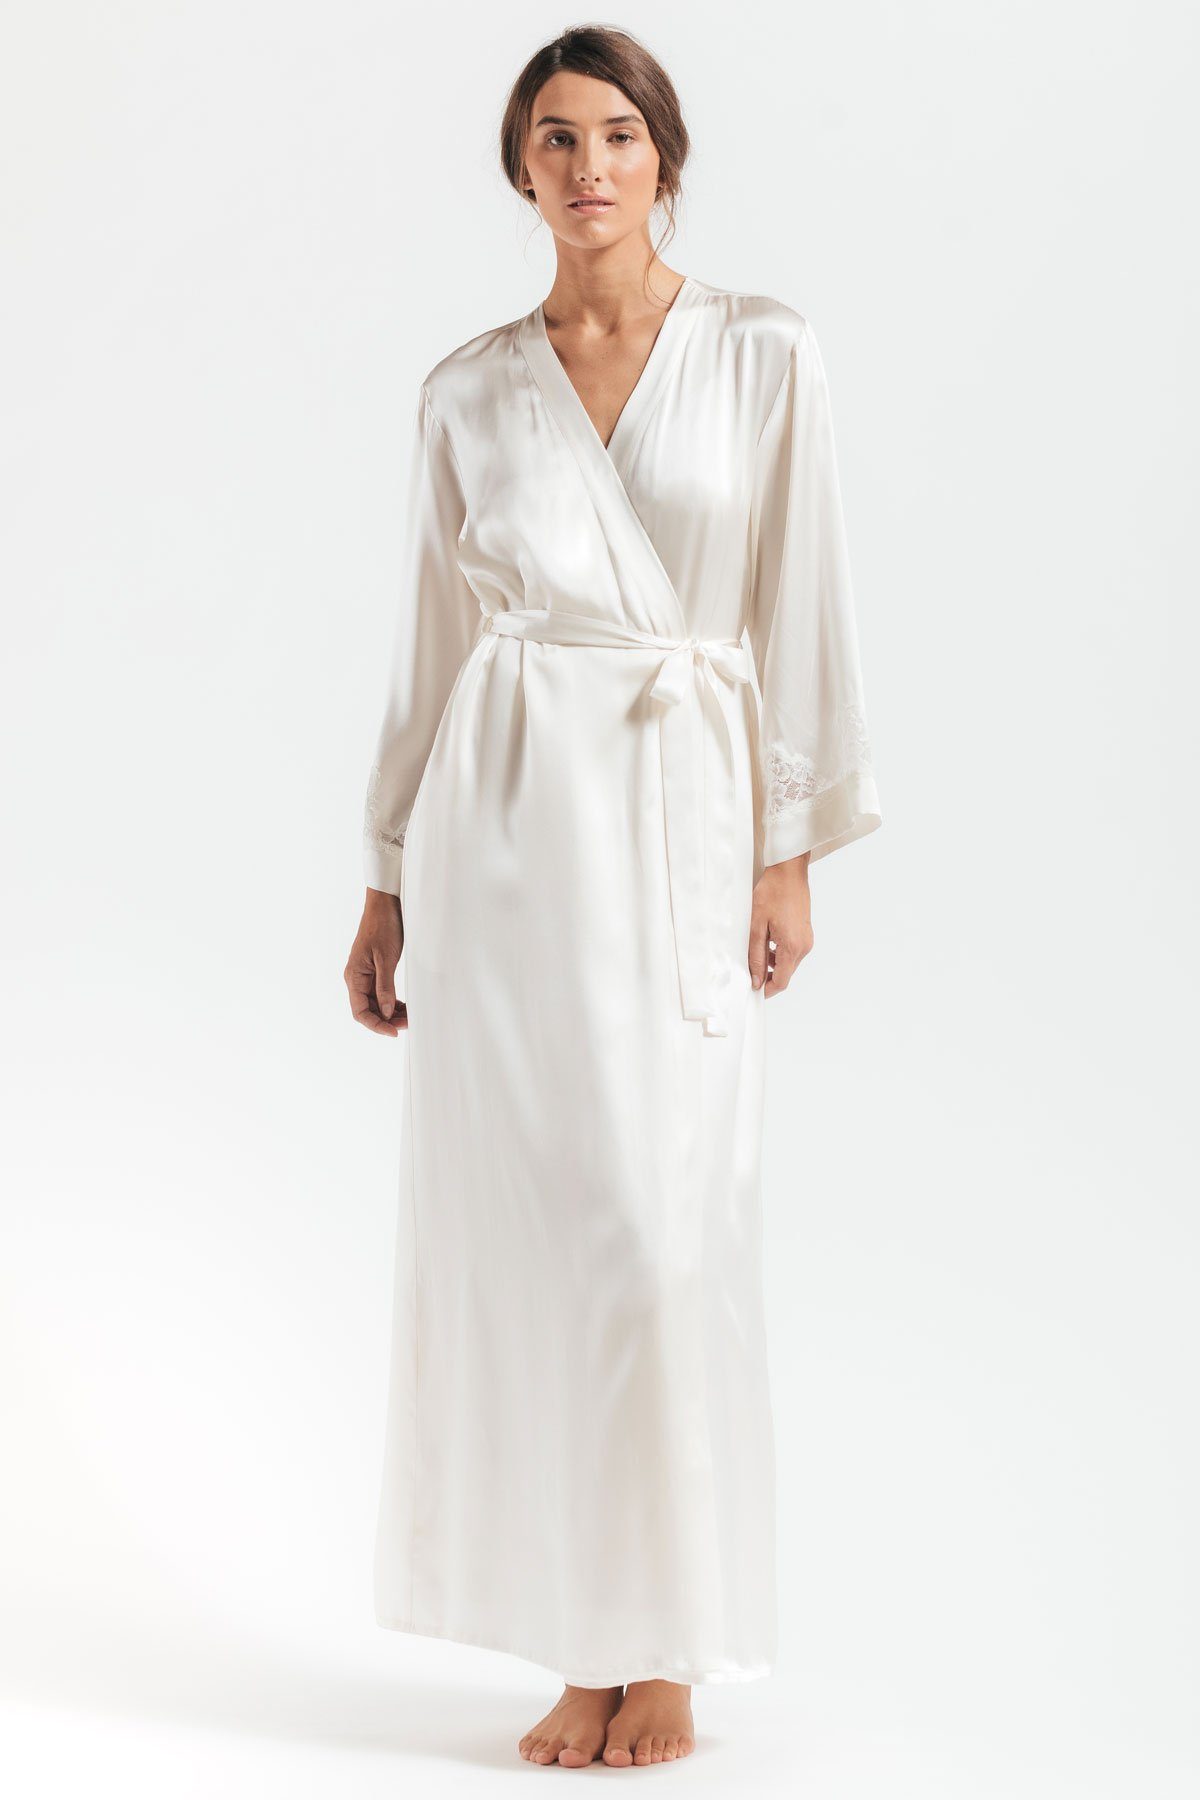 Front of model wearing Morgan Long white silk robe in ivory